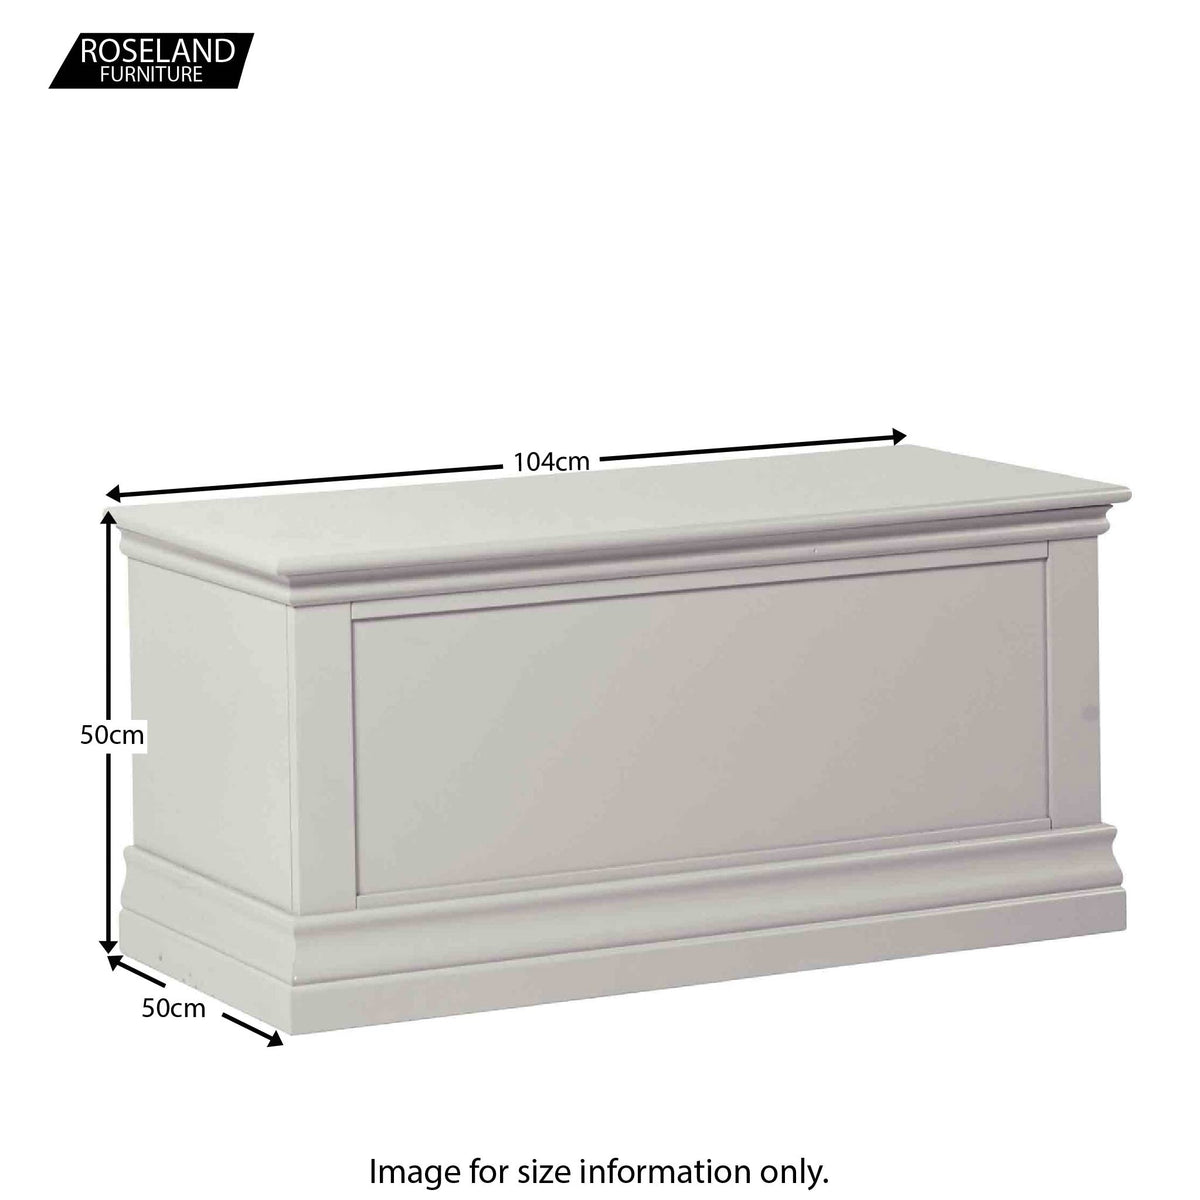 Dimensions for the Melrose Cotton White Blanket Box from Roseland Furniture